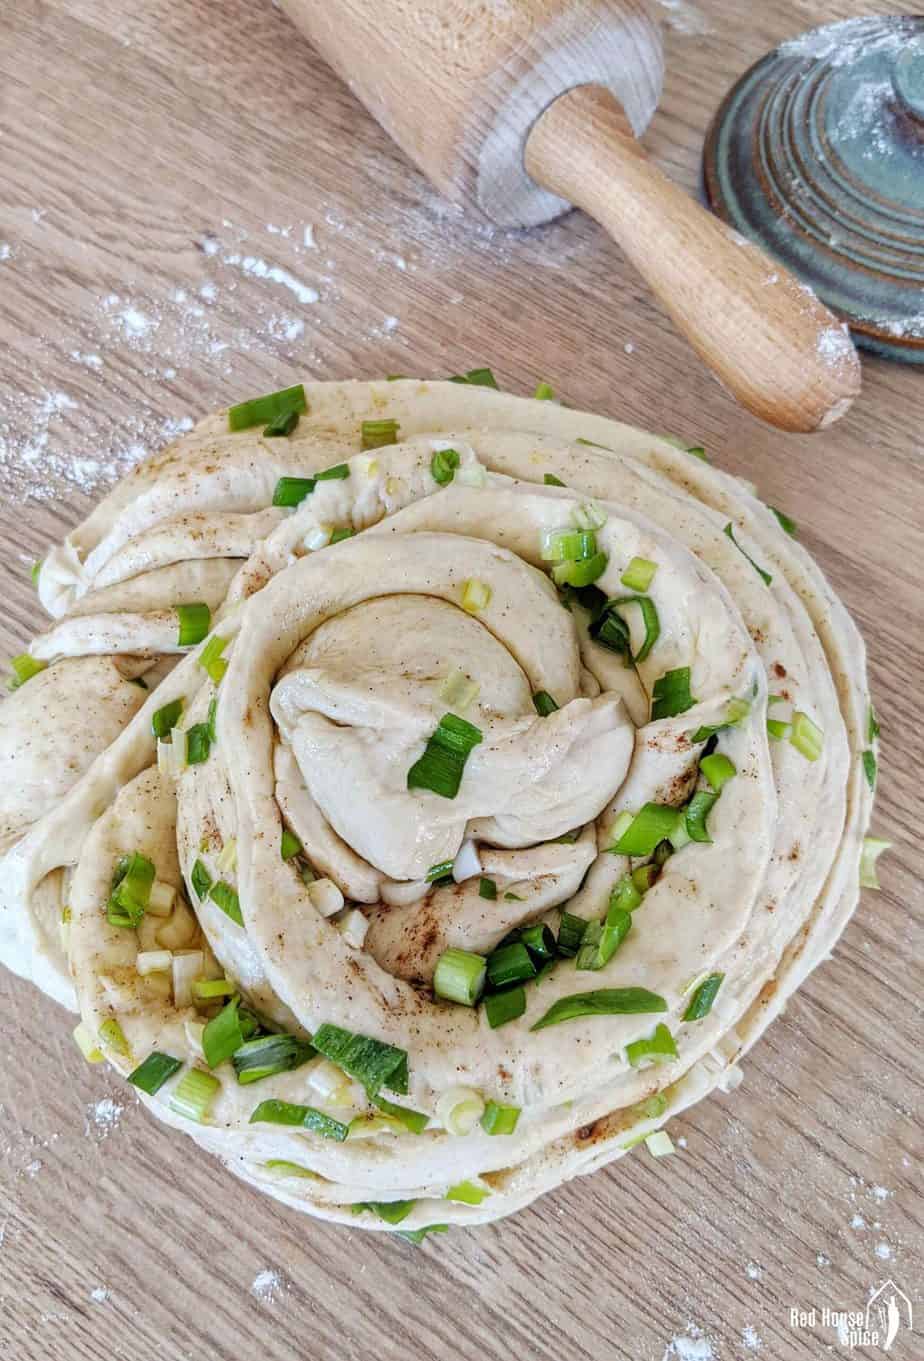 A piece of bread dough garnished with scallions